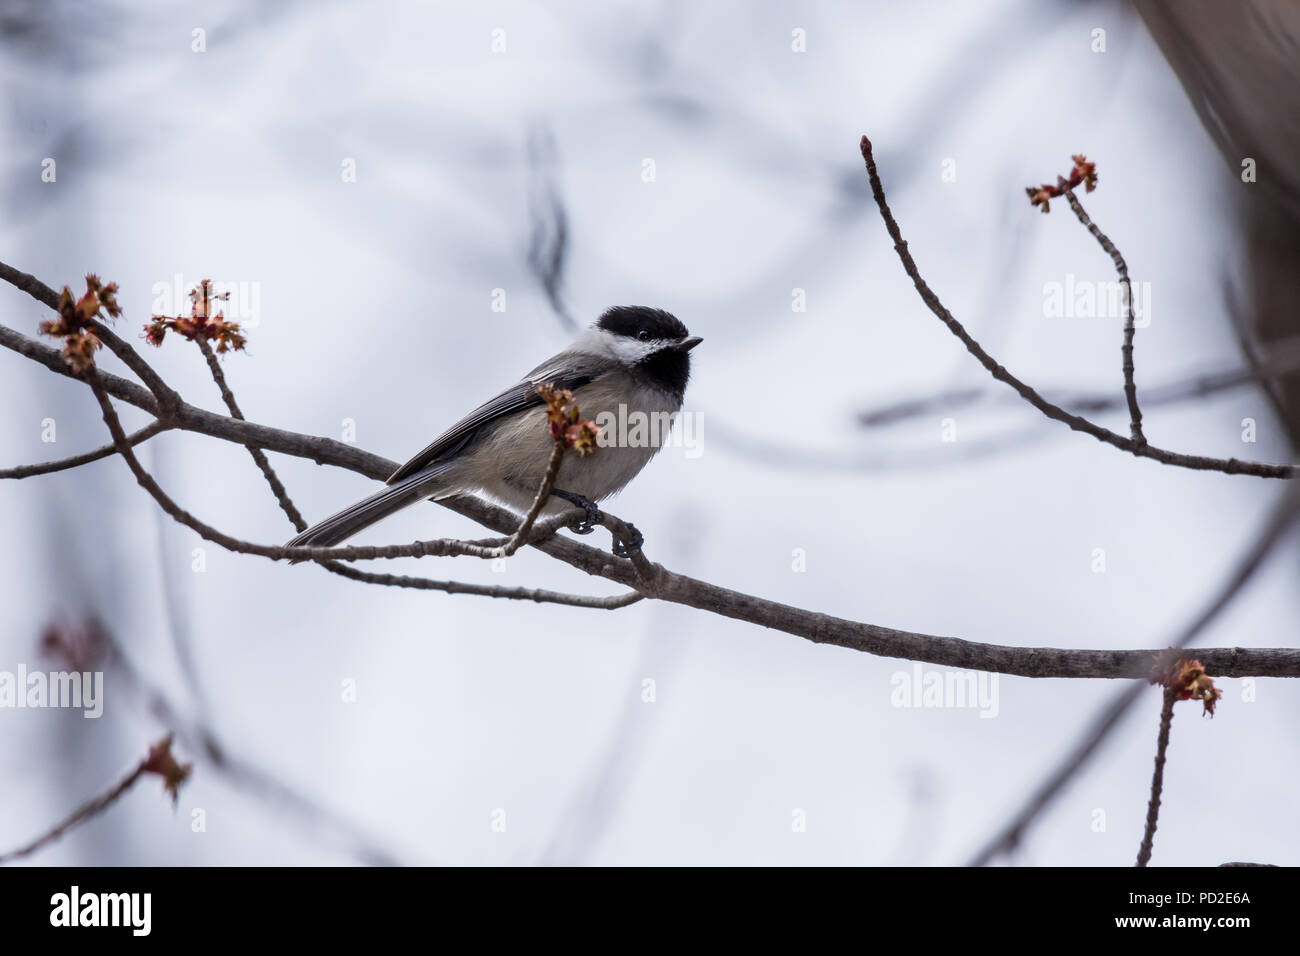 Black-capped Chickadee (Poecile atricapillus) perched in tree. Stock Photo